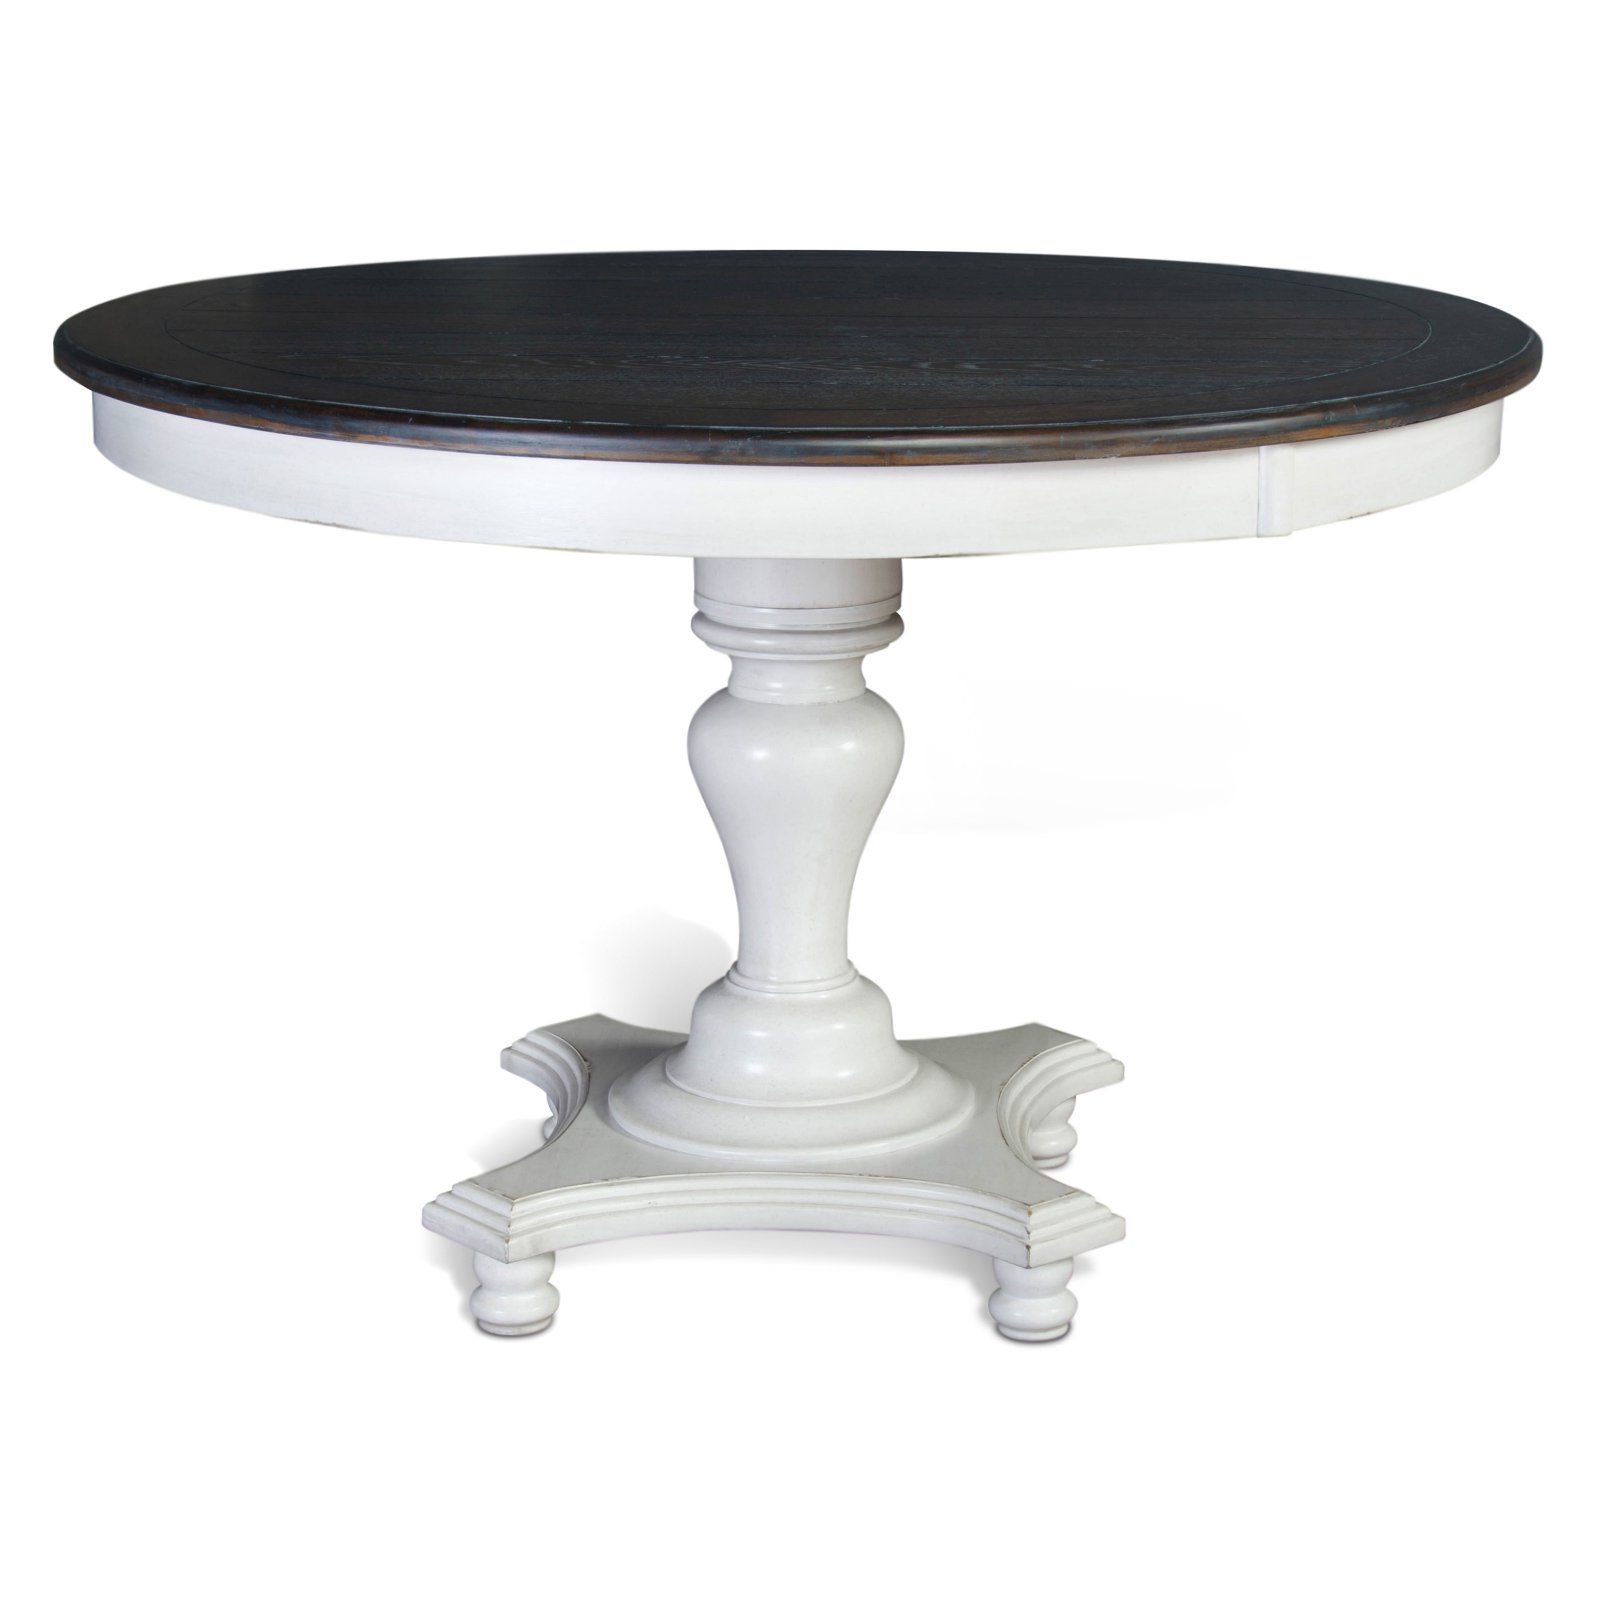 Sunny Designs Bourbon Adjustable Pedestal Dining Table Inside Newest Alexandra Round Marble Pedestal Dining Tables (View 22 of 25)